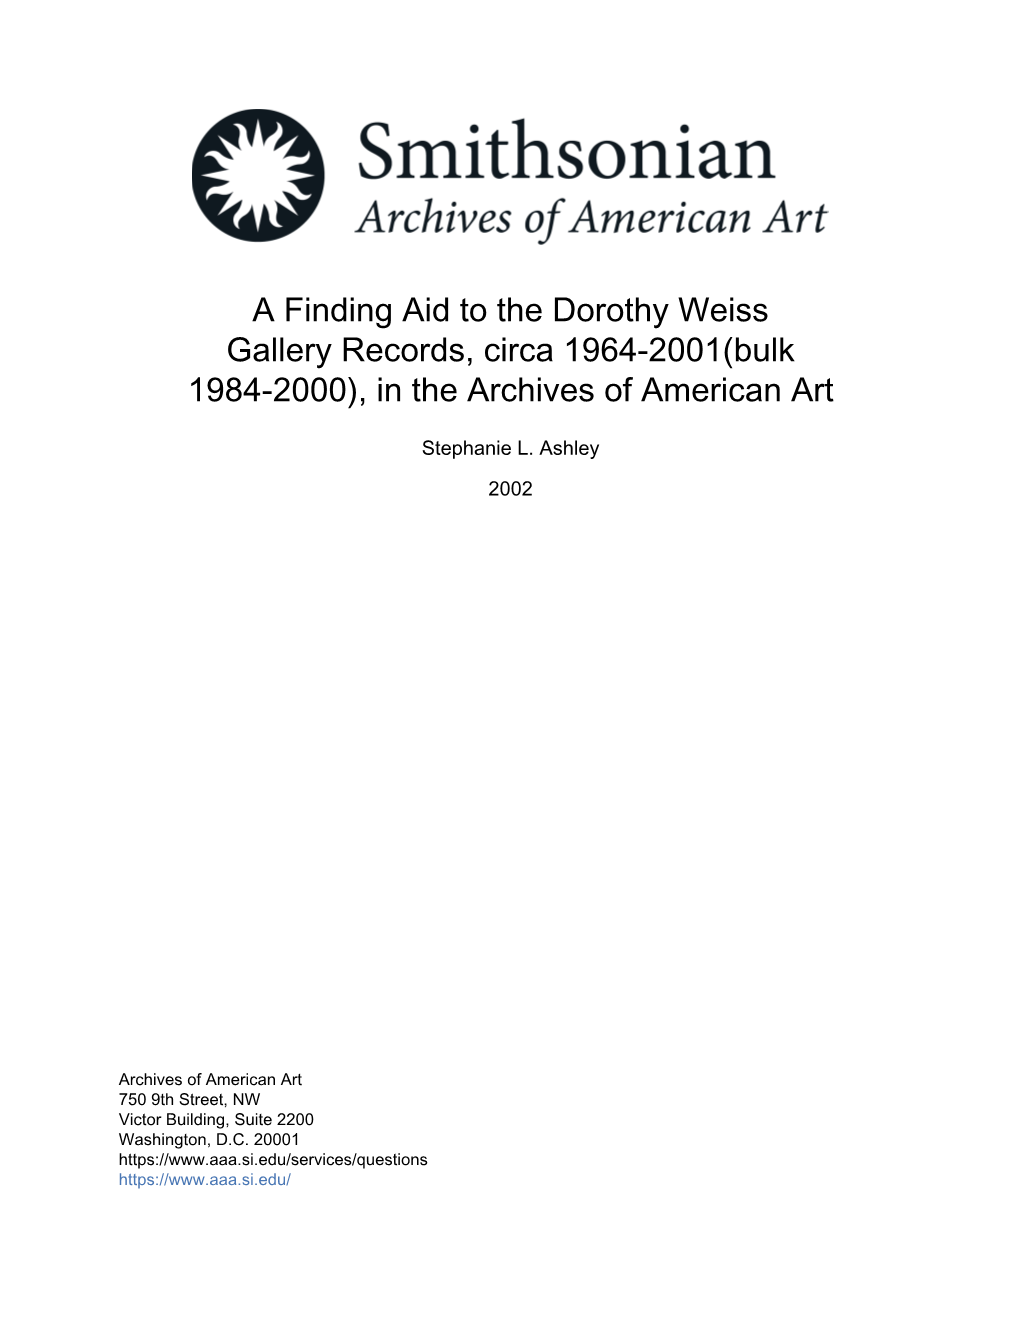 A Finding Aid to the Dorothy Weiss Gallery Records, Circa 1964-2001(Bulk 1984-2000), in the Archives of American Art